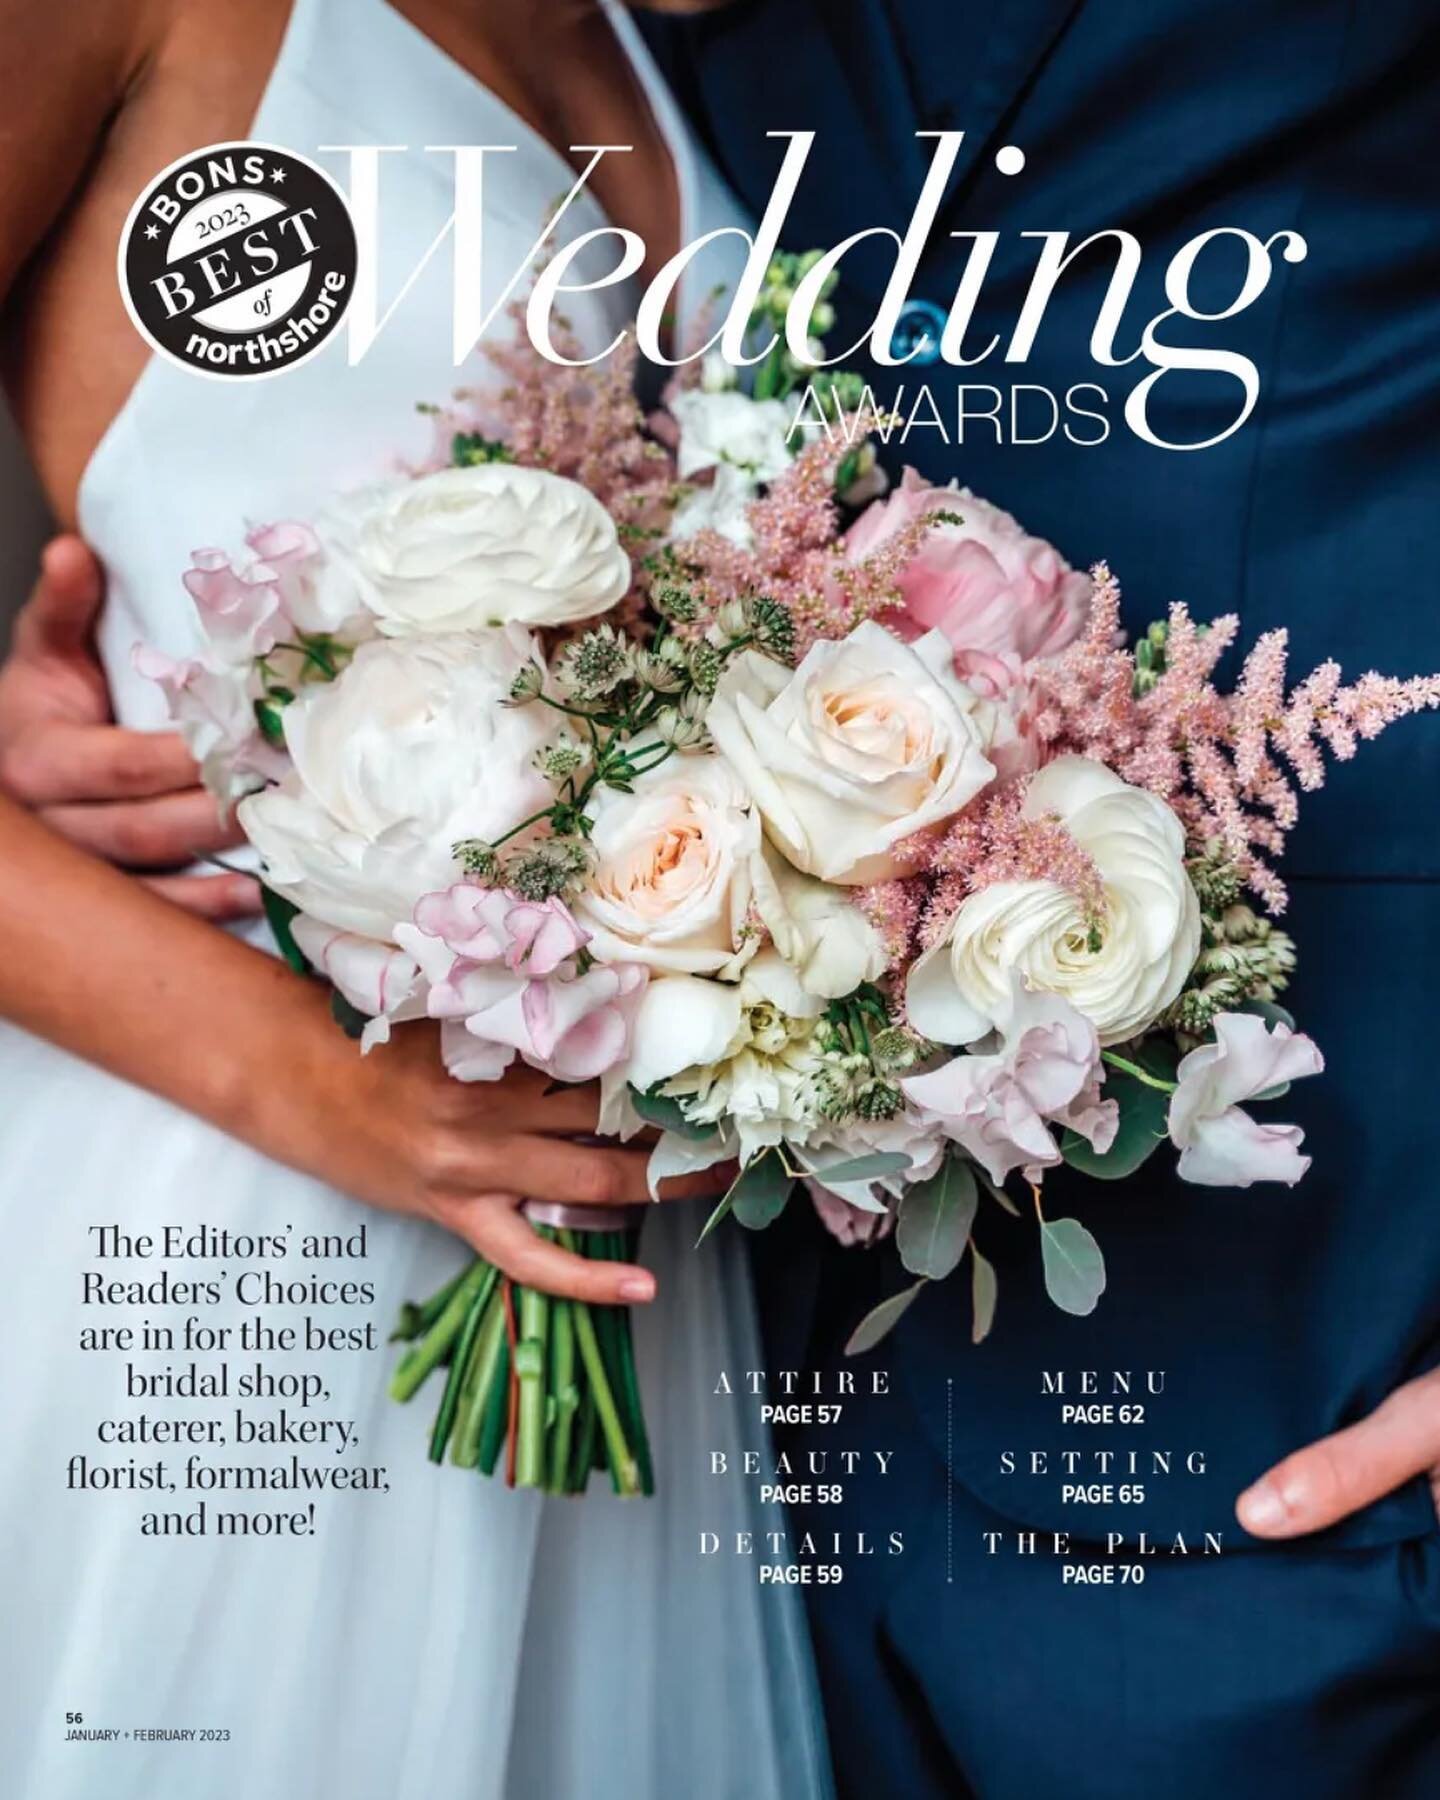 Humbled by and grateful to @northshoremag 💕 
.
Cheers to all the #BONSWedding2023 winners🎉
.
SWIPE for a surprise 🫢
.
.
#bostonnorthshore #bons #eventplanner #bostonmomblogger #bostonevents #bostoneventplanner